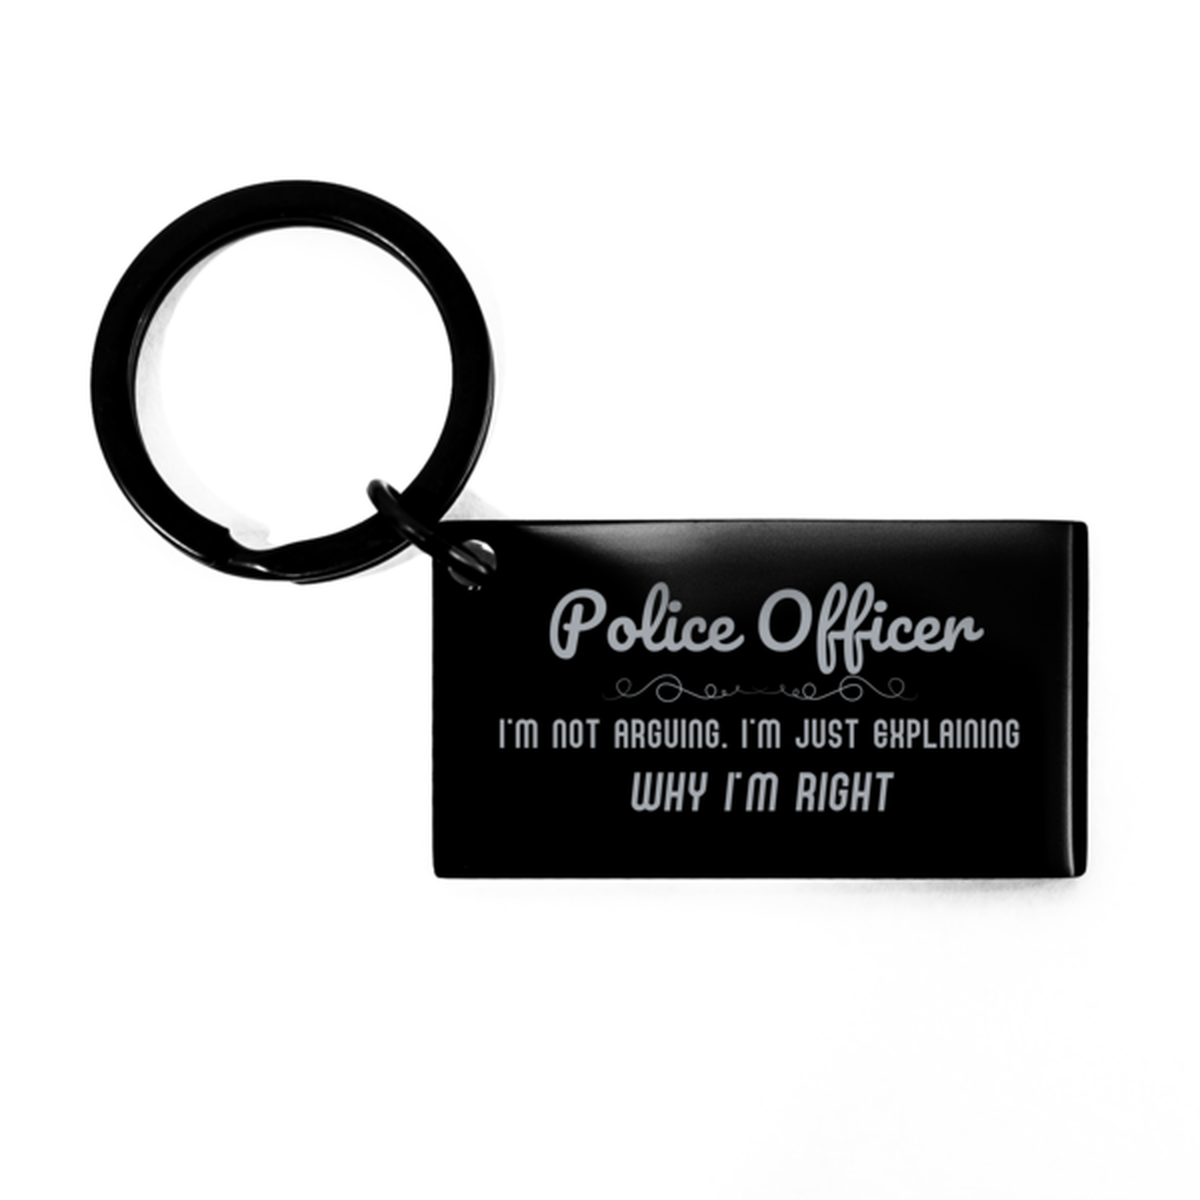 Police Officer I'm not Arguing. I'm Just Explaining Why I'm RIGHT Keychain, Funny Saying Quote Police Officer Gifts For Police Officer Graduation Birthday Christmas Gifts for Men Women Coworker